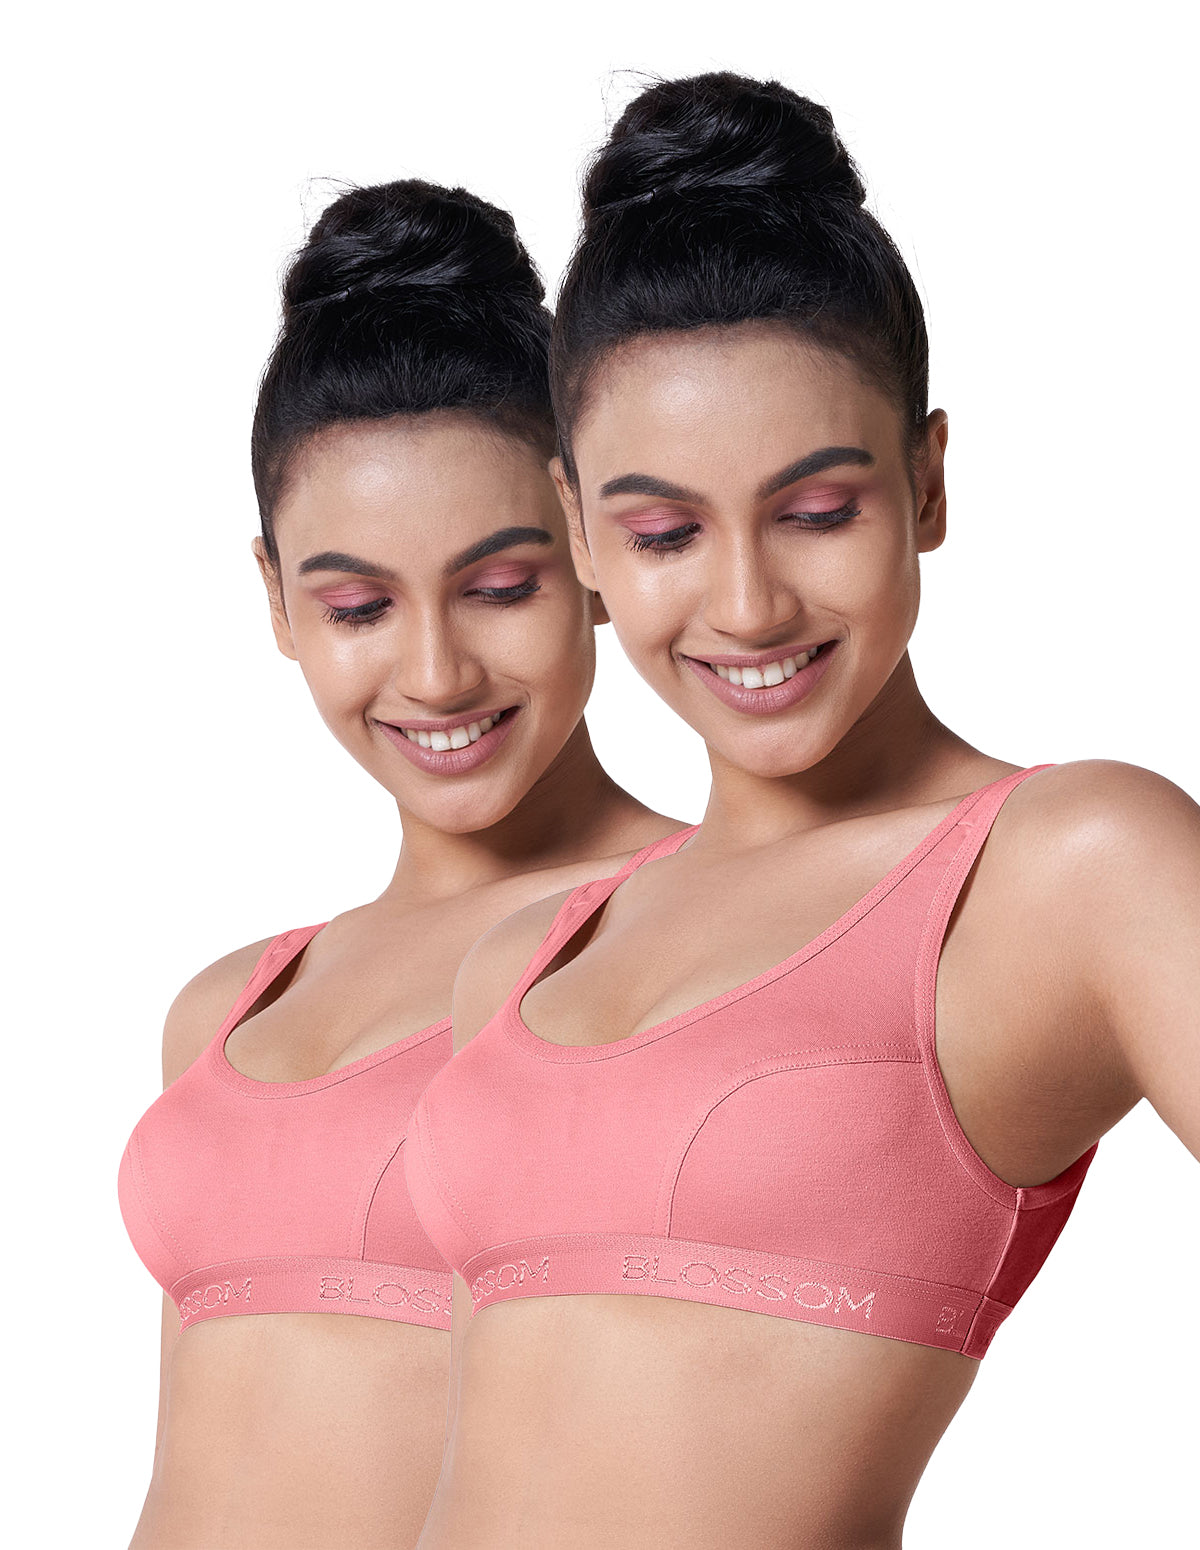 blossom-sporty bra-Pack of 2-pink1-Sports collection-utility based bra